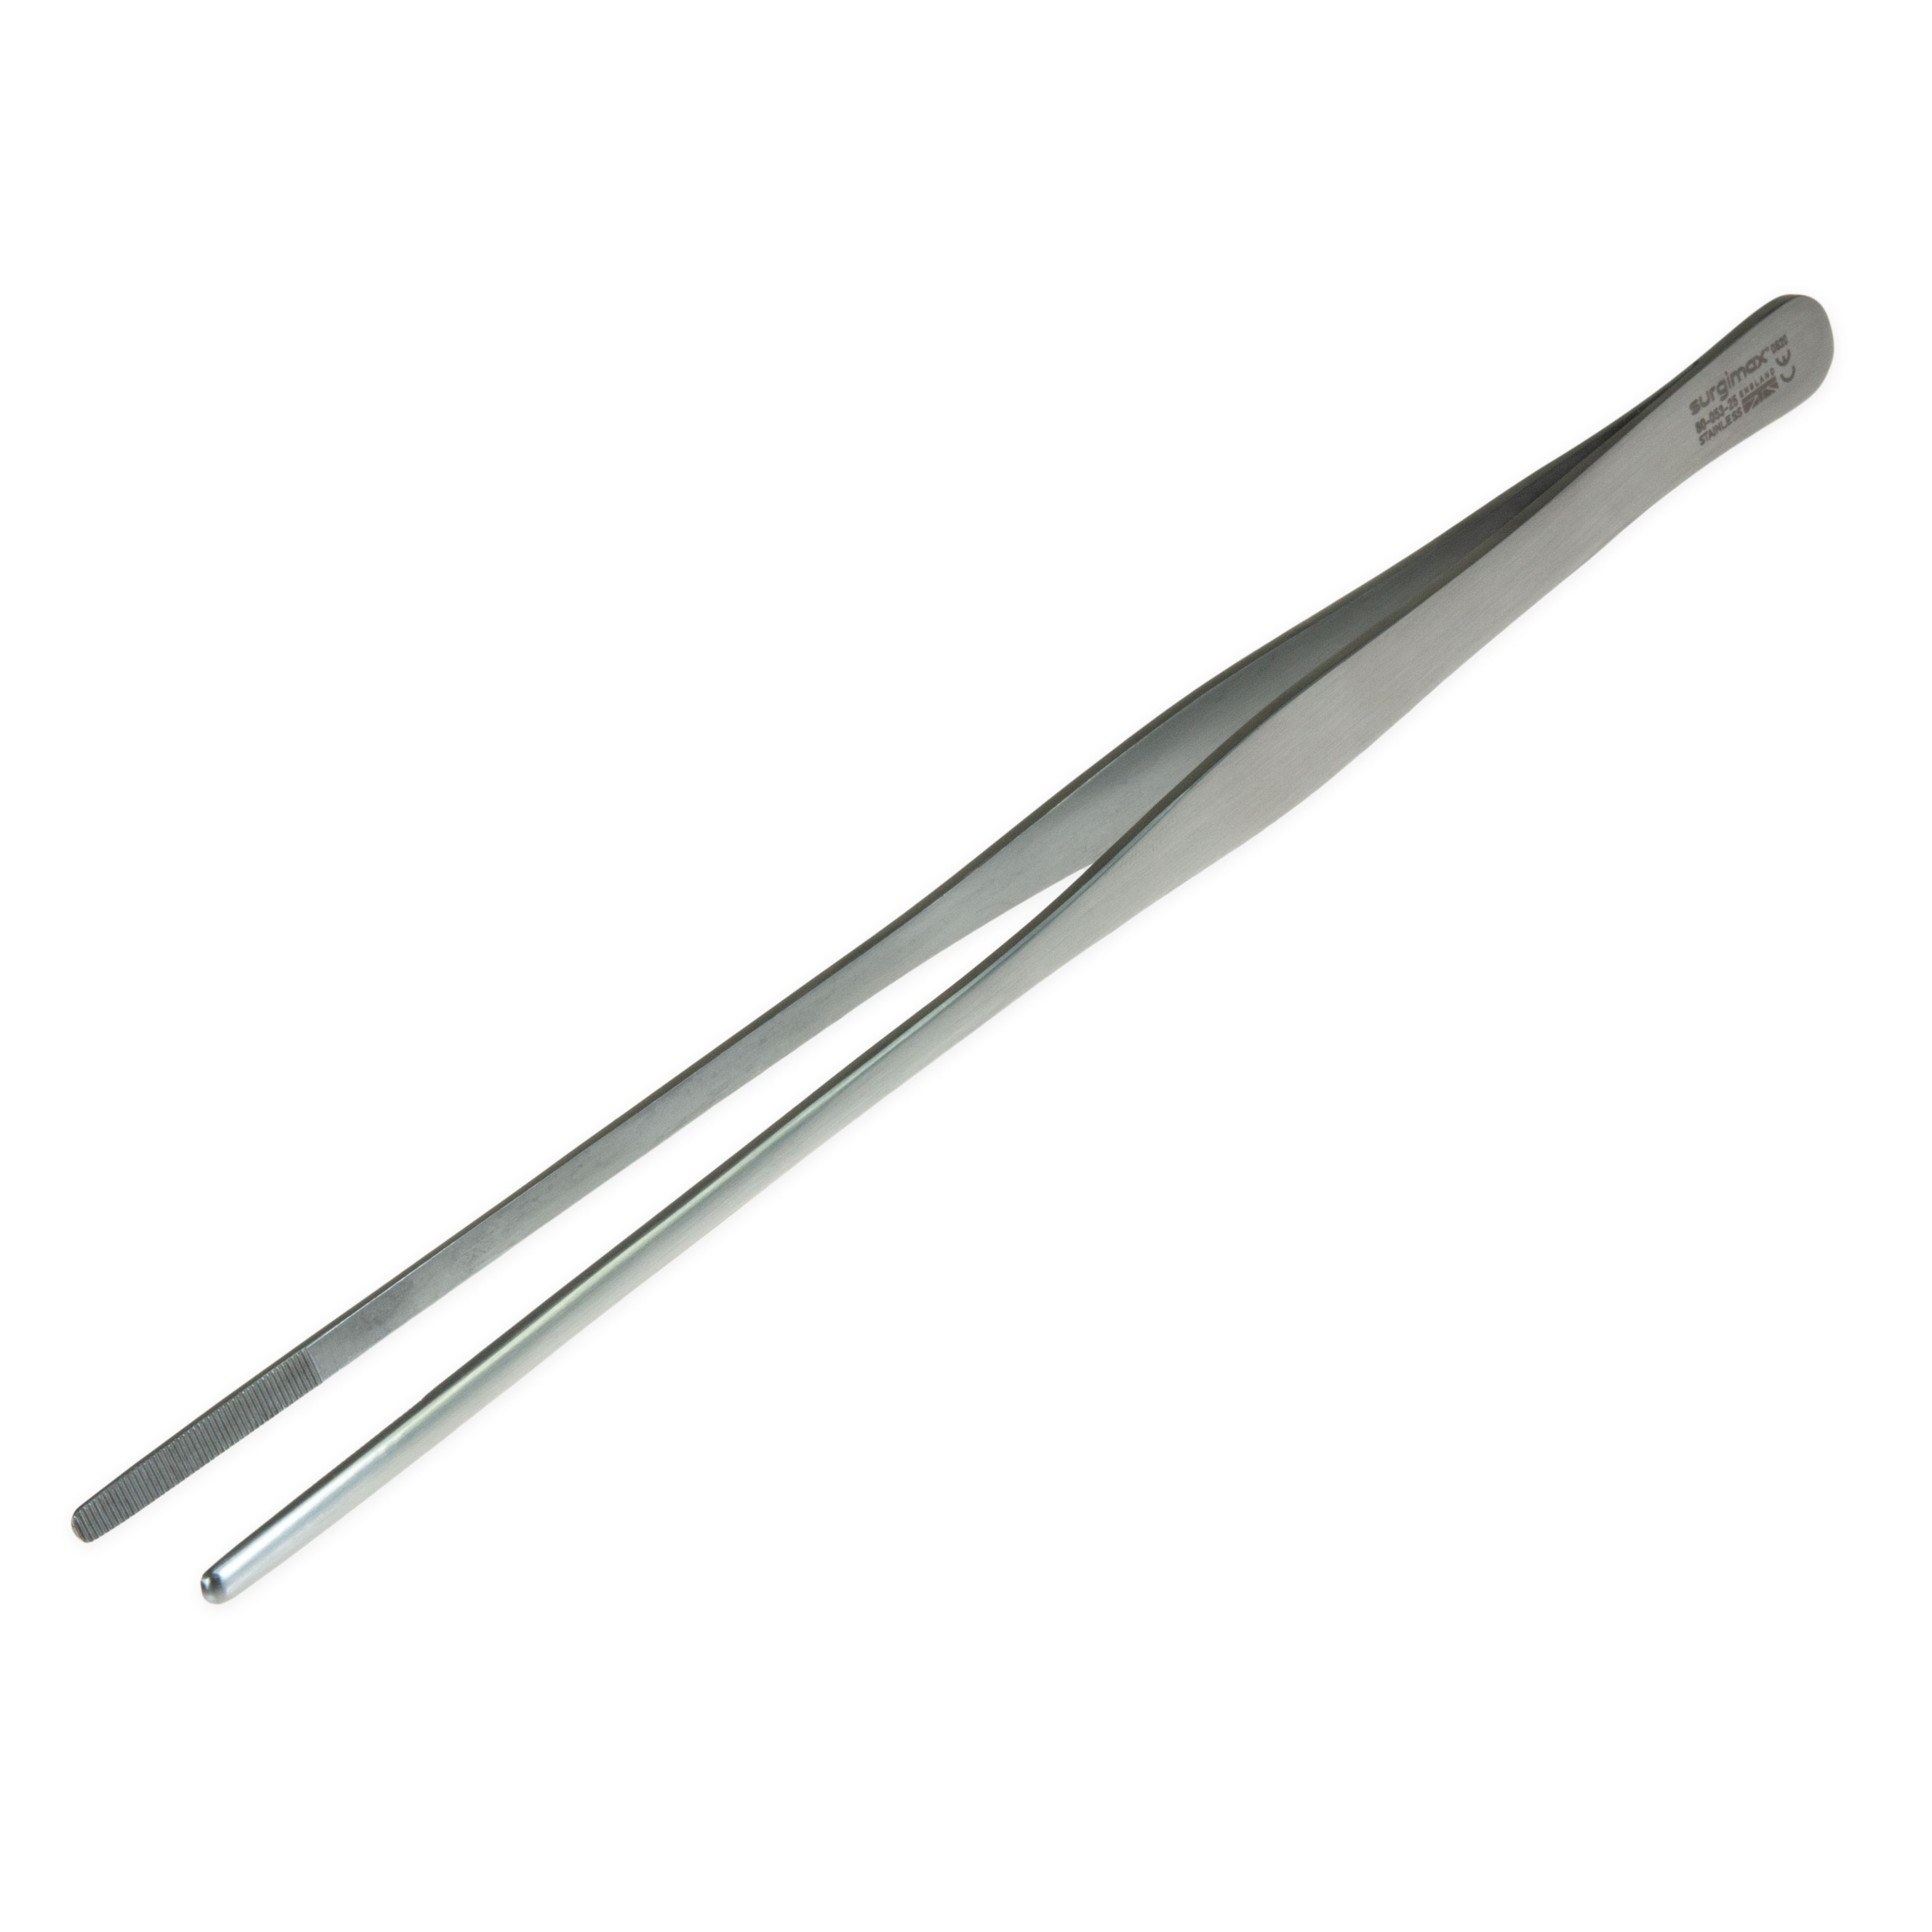 Tweezers 25 cm, slim with curved sides, straight